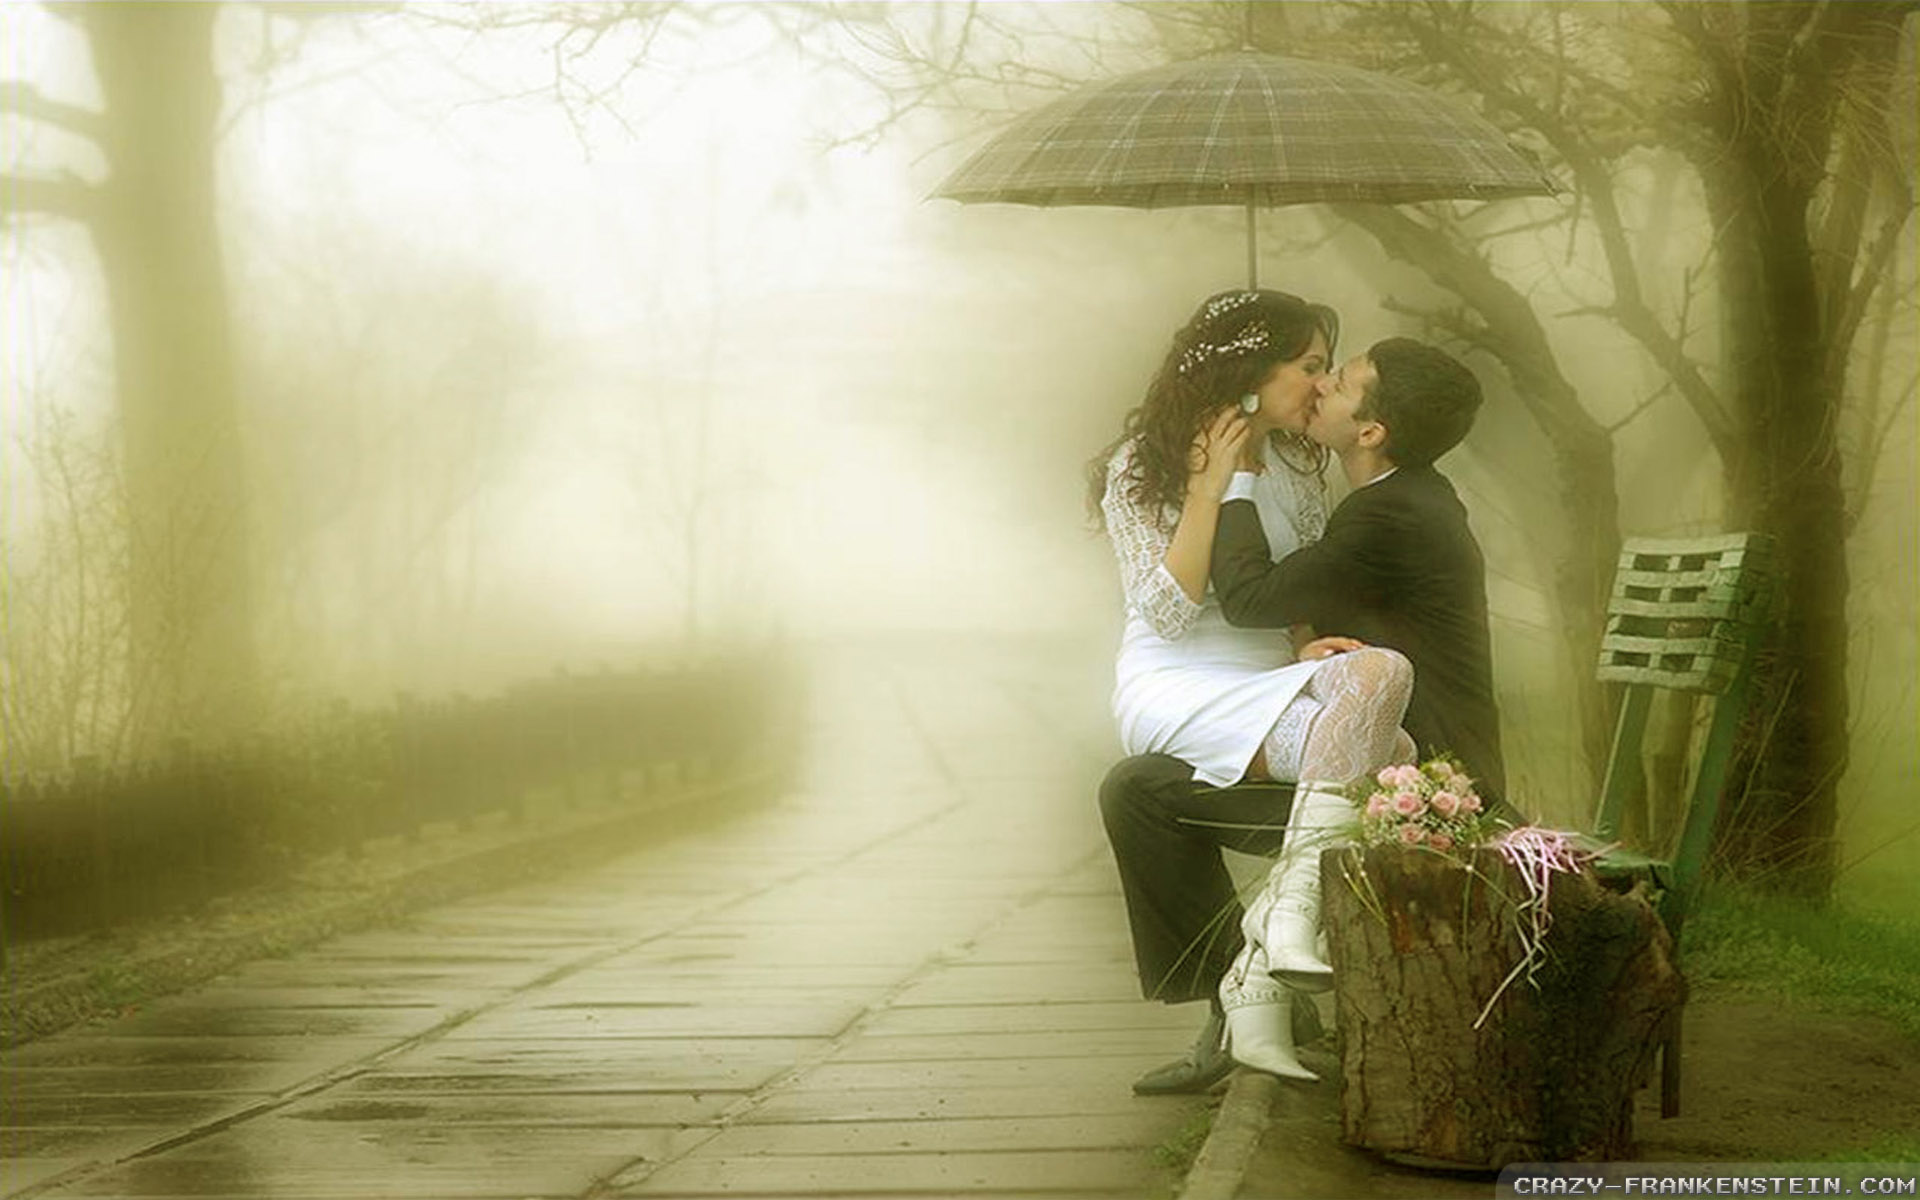 Hdq Beautiful Hd Romantic Images & Wallpapers - Most Romantic Wallpaper Hd - HD Wallpaper 